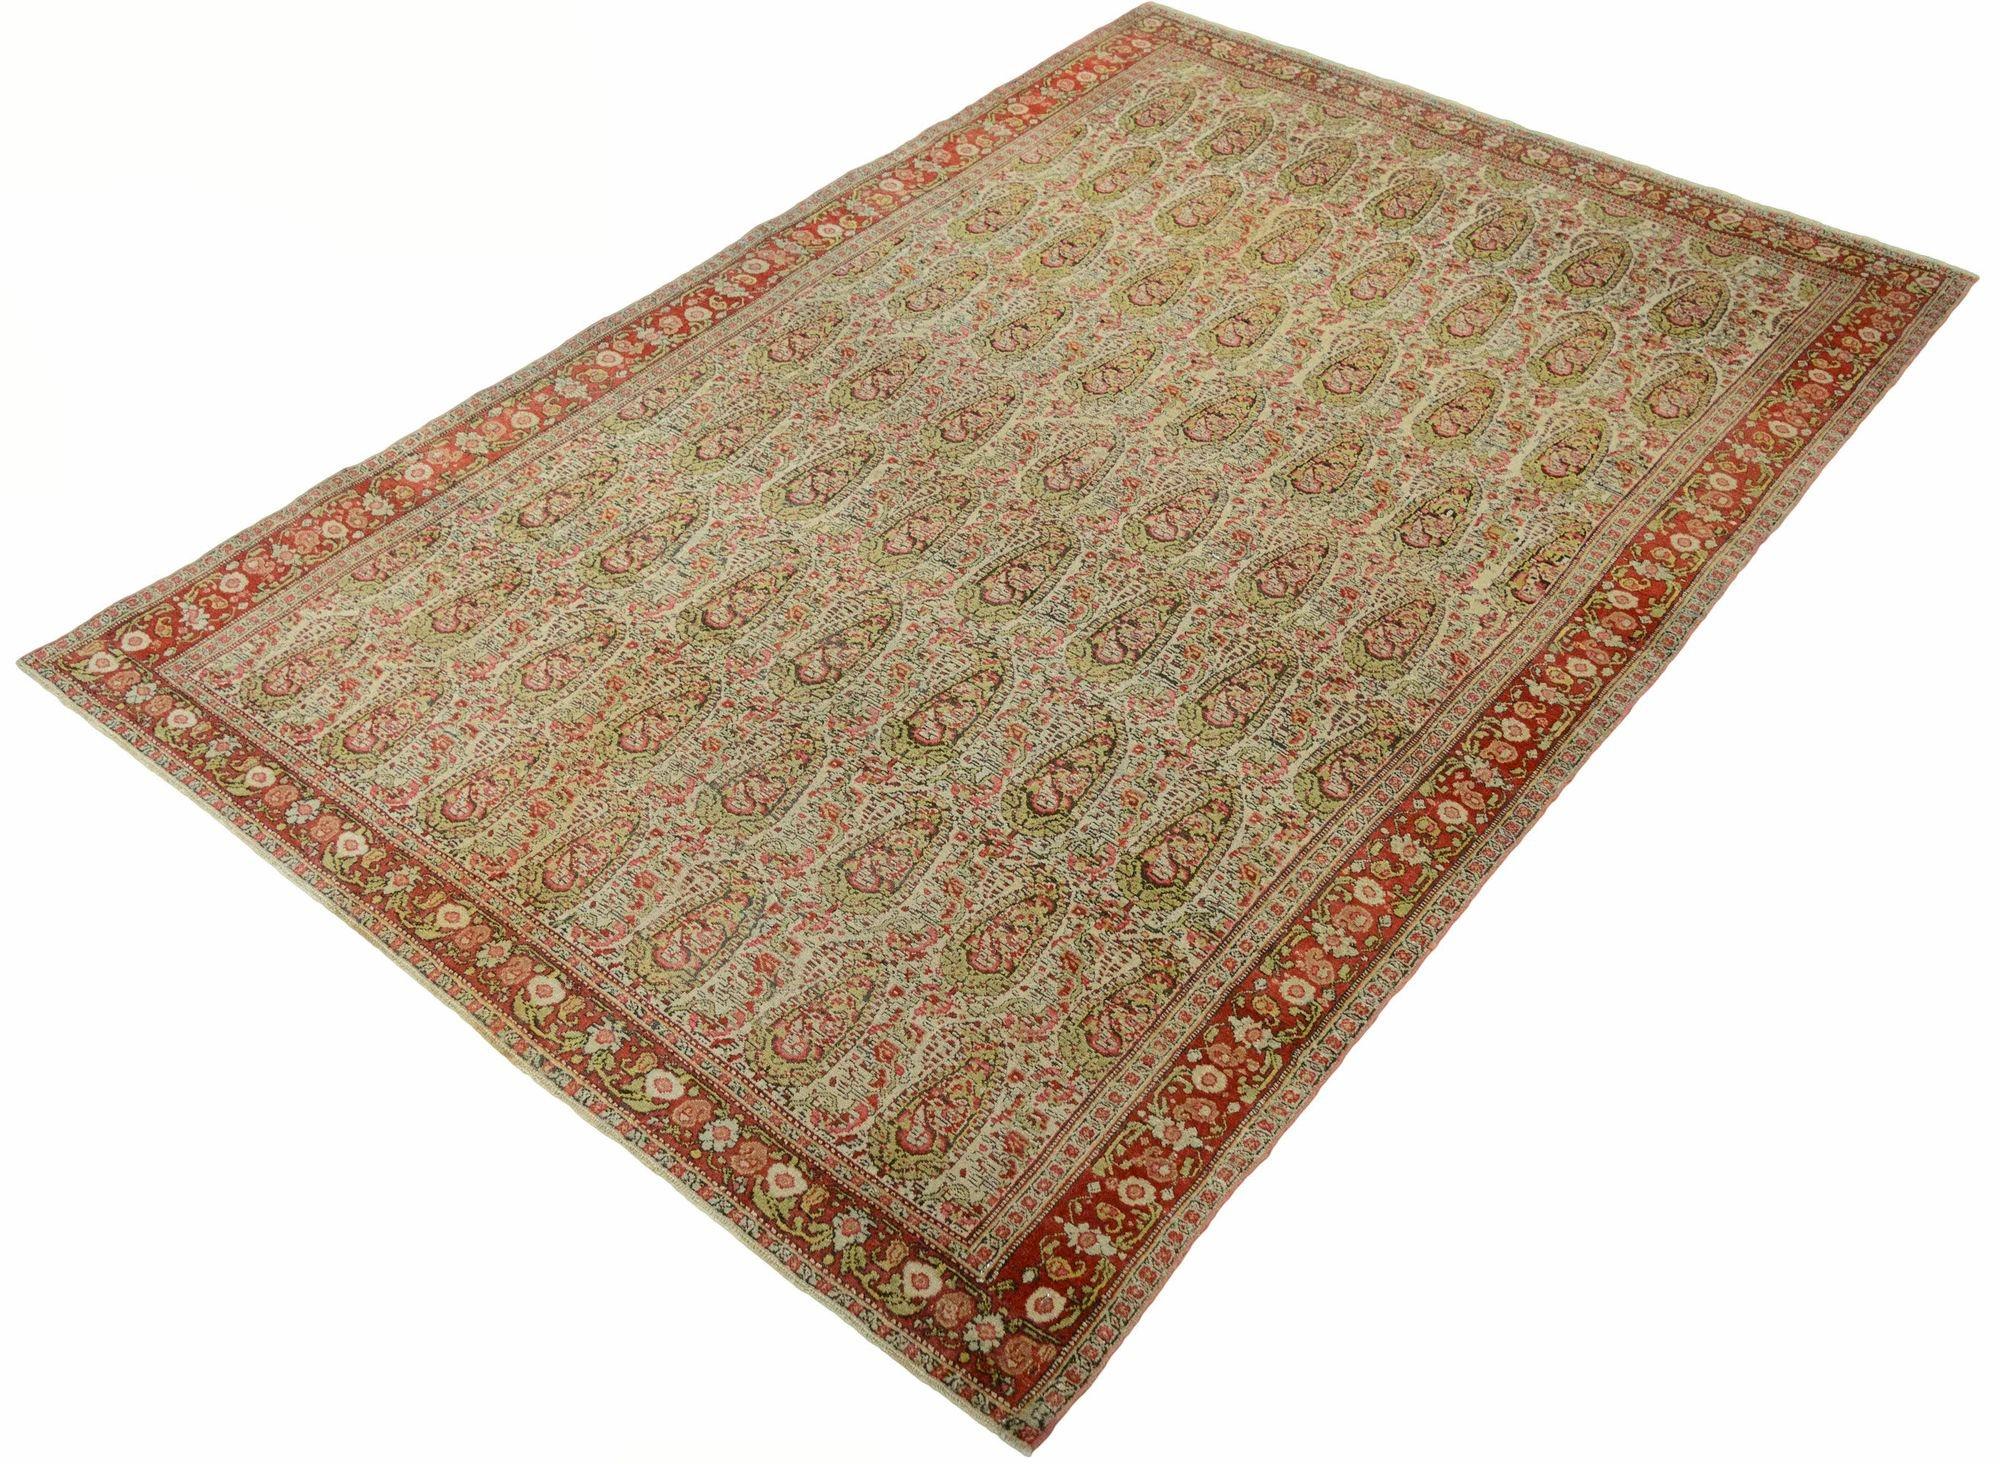 Antique Senneh Rug 2.02m x 1.36m In Good Condition For Sale In St. Albans, GB